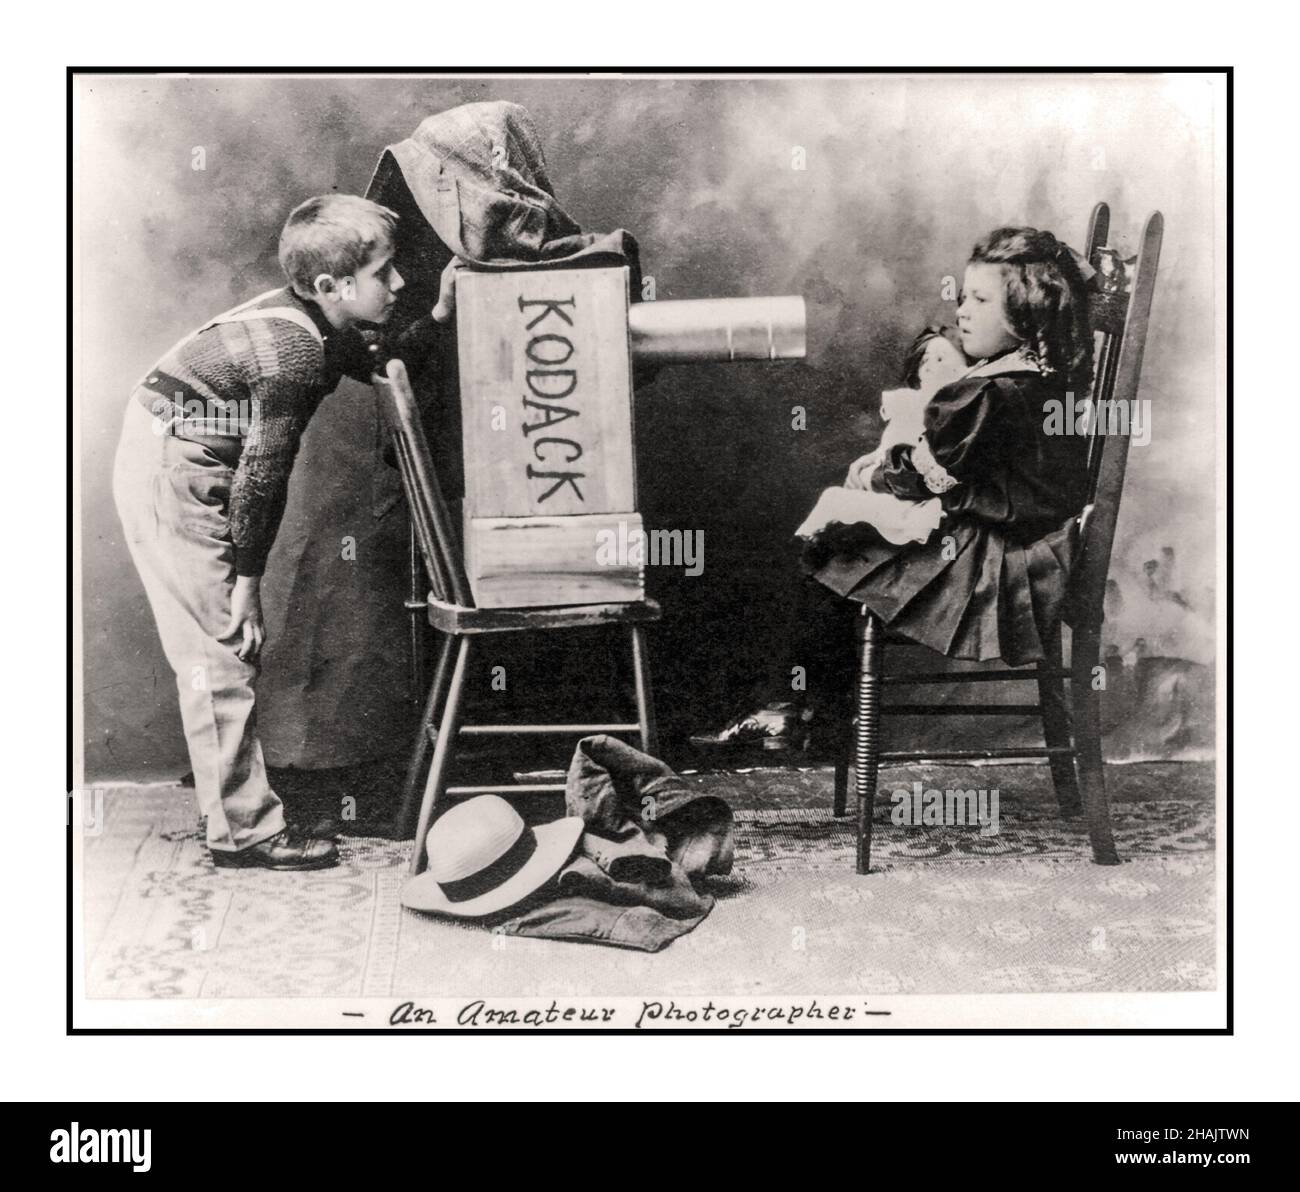 Vintage 1900s charming lifestyle photograph 'An amateur photographer' early humourous studio lifestyle photograph featuring deliberate typo miss-spelt Kodak Photograph shows boy with homemade 'Kodack' camera pretending to photograph little girl with doll. Spencer, George W., photographer Created / Published c1907. Children--1900-1910 Photographers--1900-1910 -  Photography--1900-1910 Photographic prints--1900-1910. Stock Photo